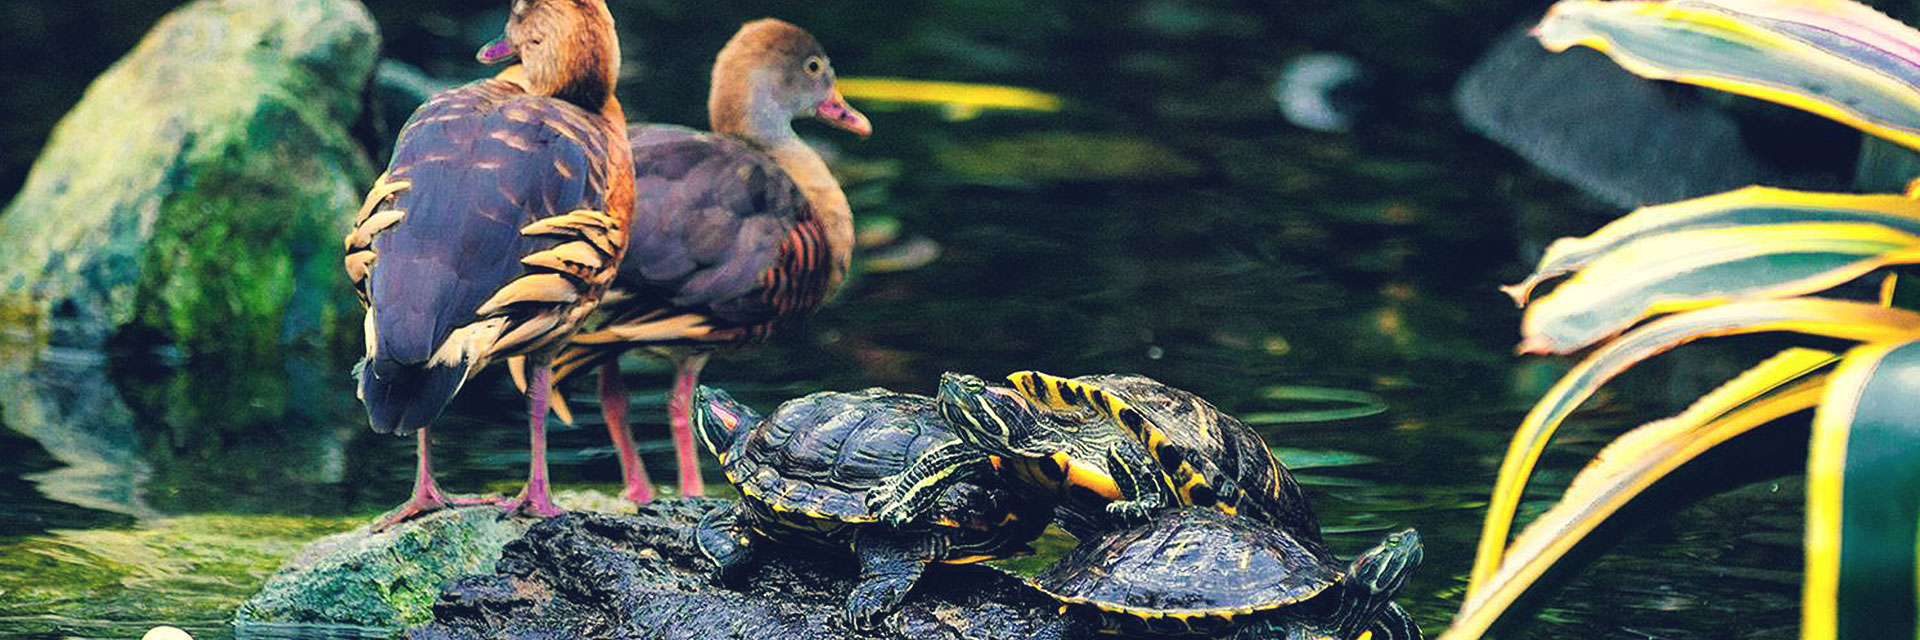 Pond with turtle and birds